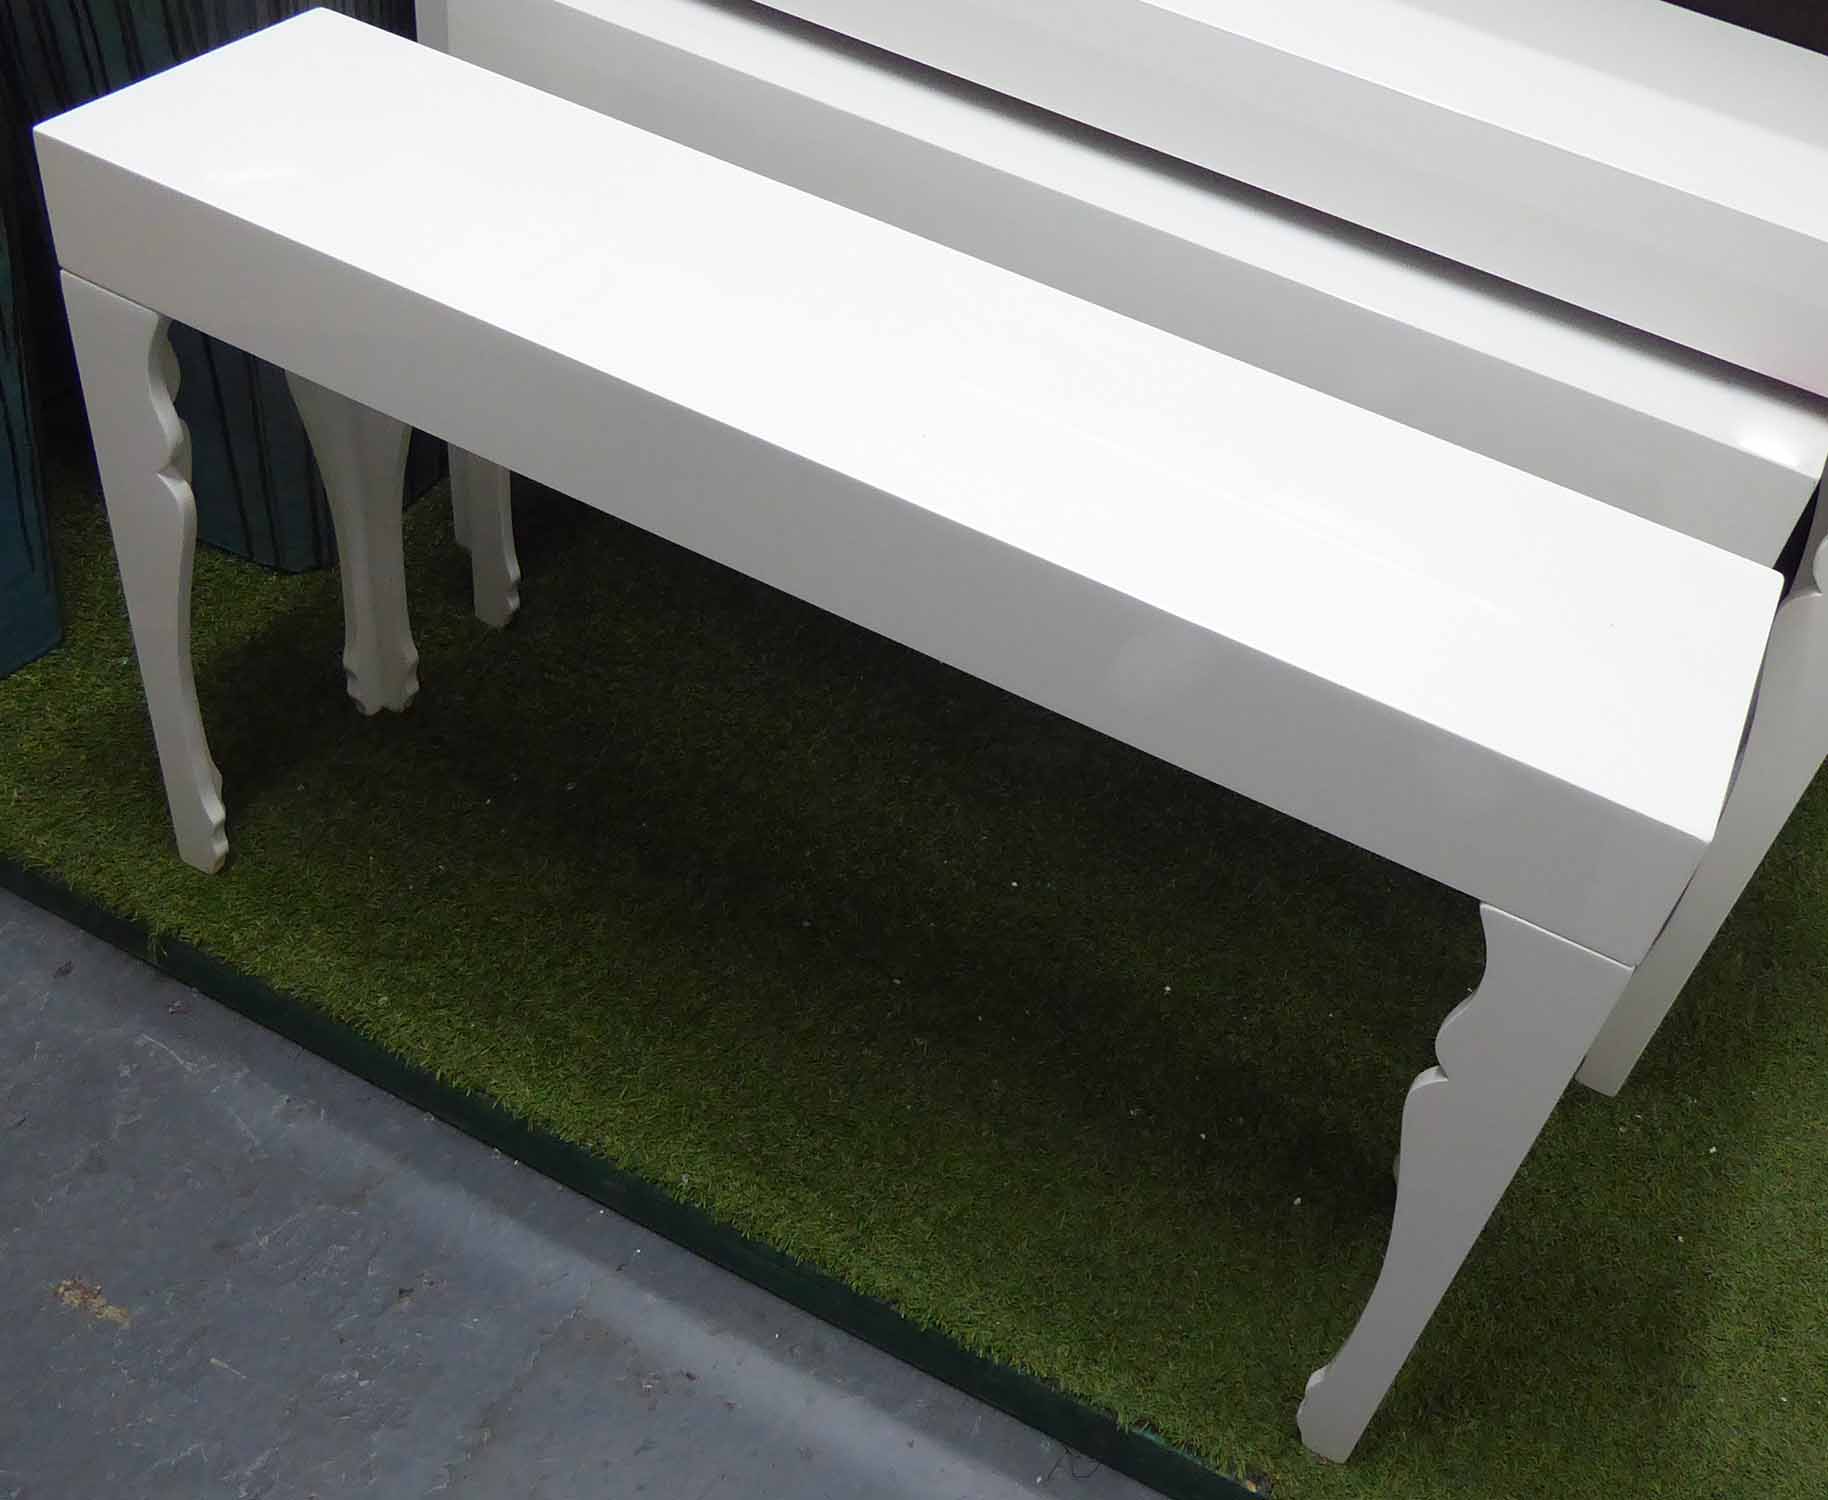 CONSOLE TABLE, Louis style in the manner the Heals design, white lacquered, 110cm L 28cm W x 67cm H.